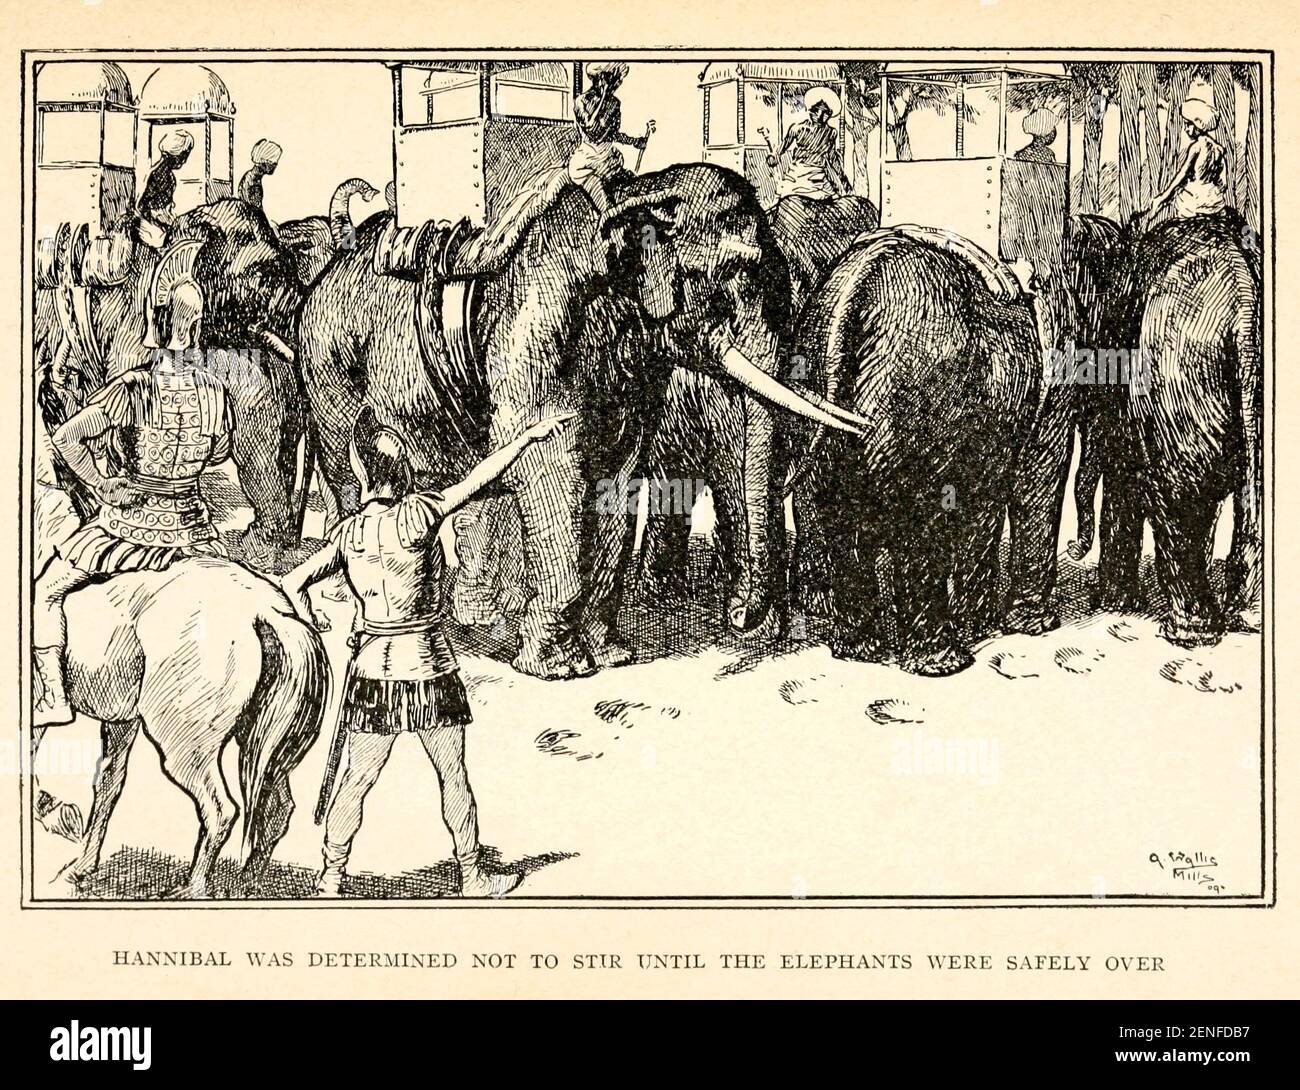 Hannibal was determined not to stir until the elephants were safely over illustrating the Story ' Hannibal ' From the book '  The red book of heroes ' by Mrs. Lang, Edited by Andrew Lang, illustrated by A. Wallis Mills, Published by Longmans, Green, and Co. New York, London, Bombay and Calcutta in 1909 Stock Photo